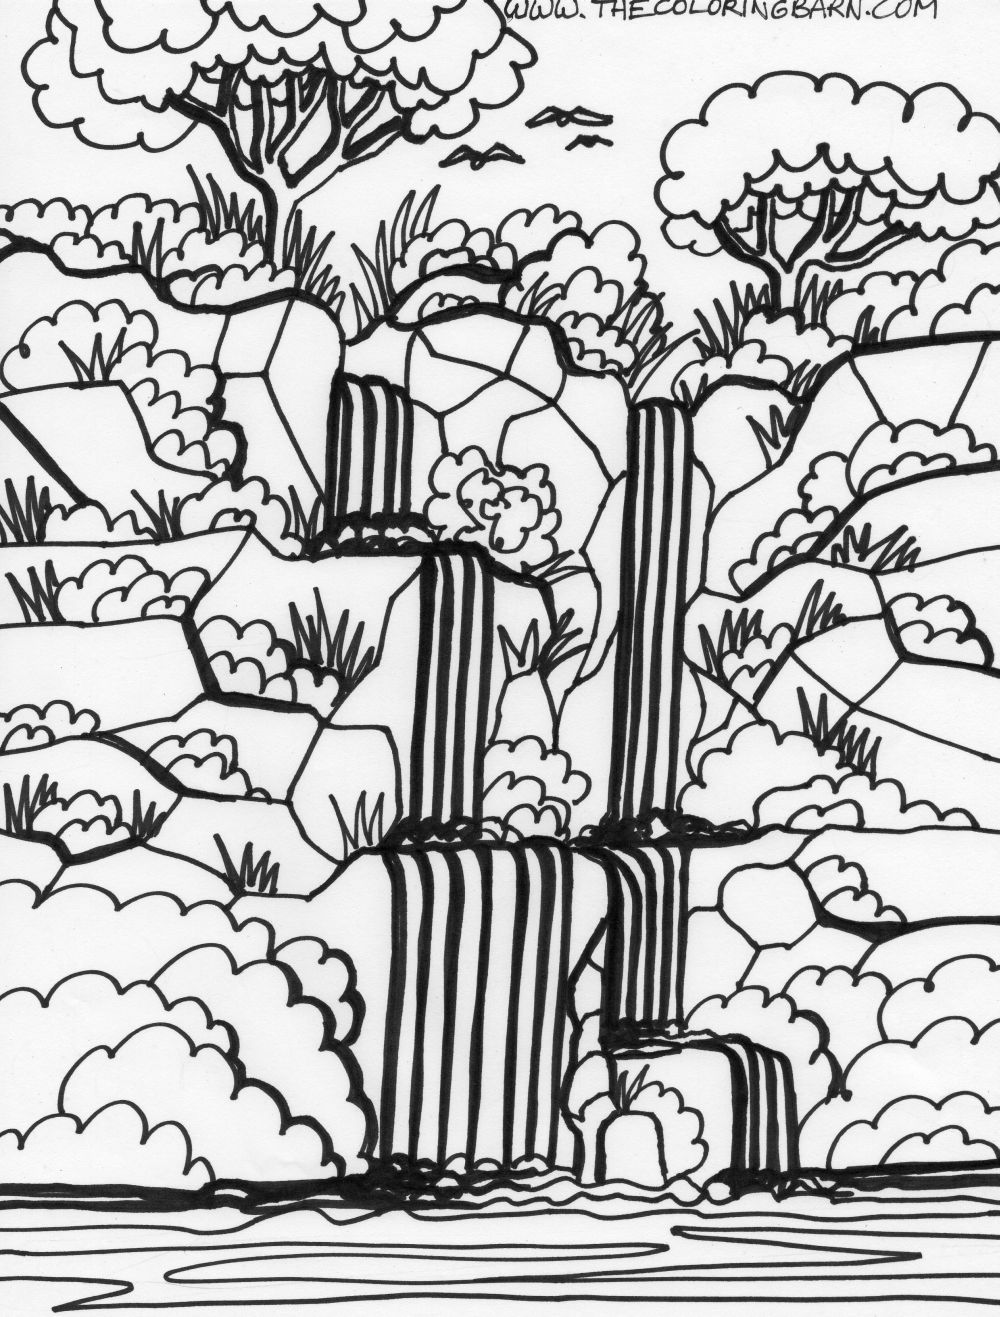 free coloring pages of waterfalls